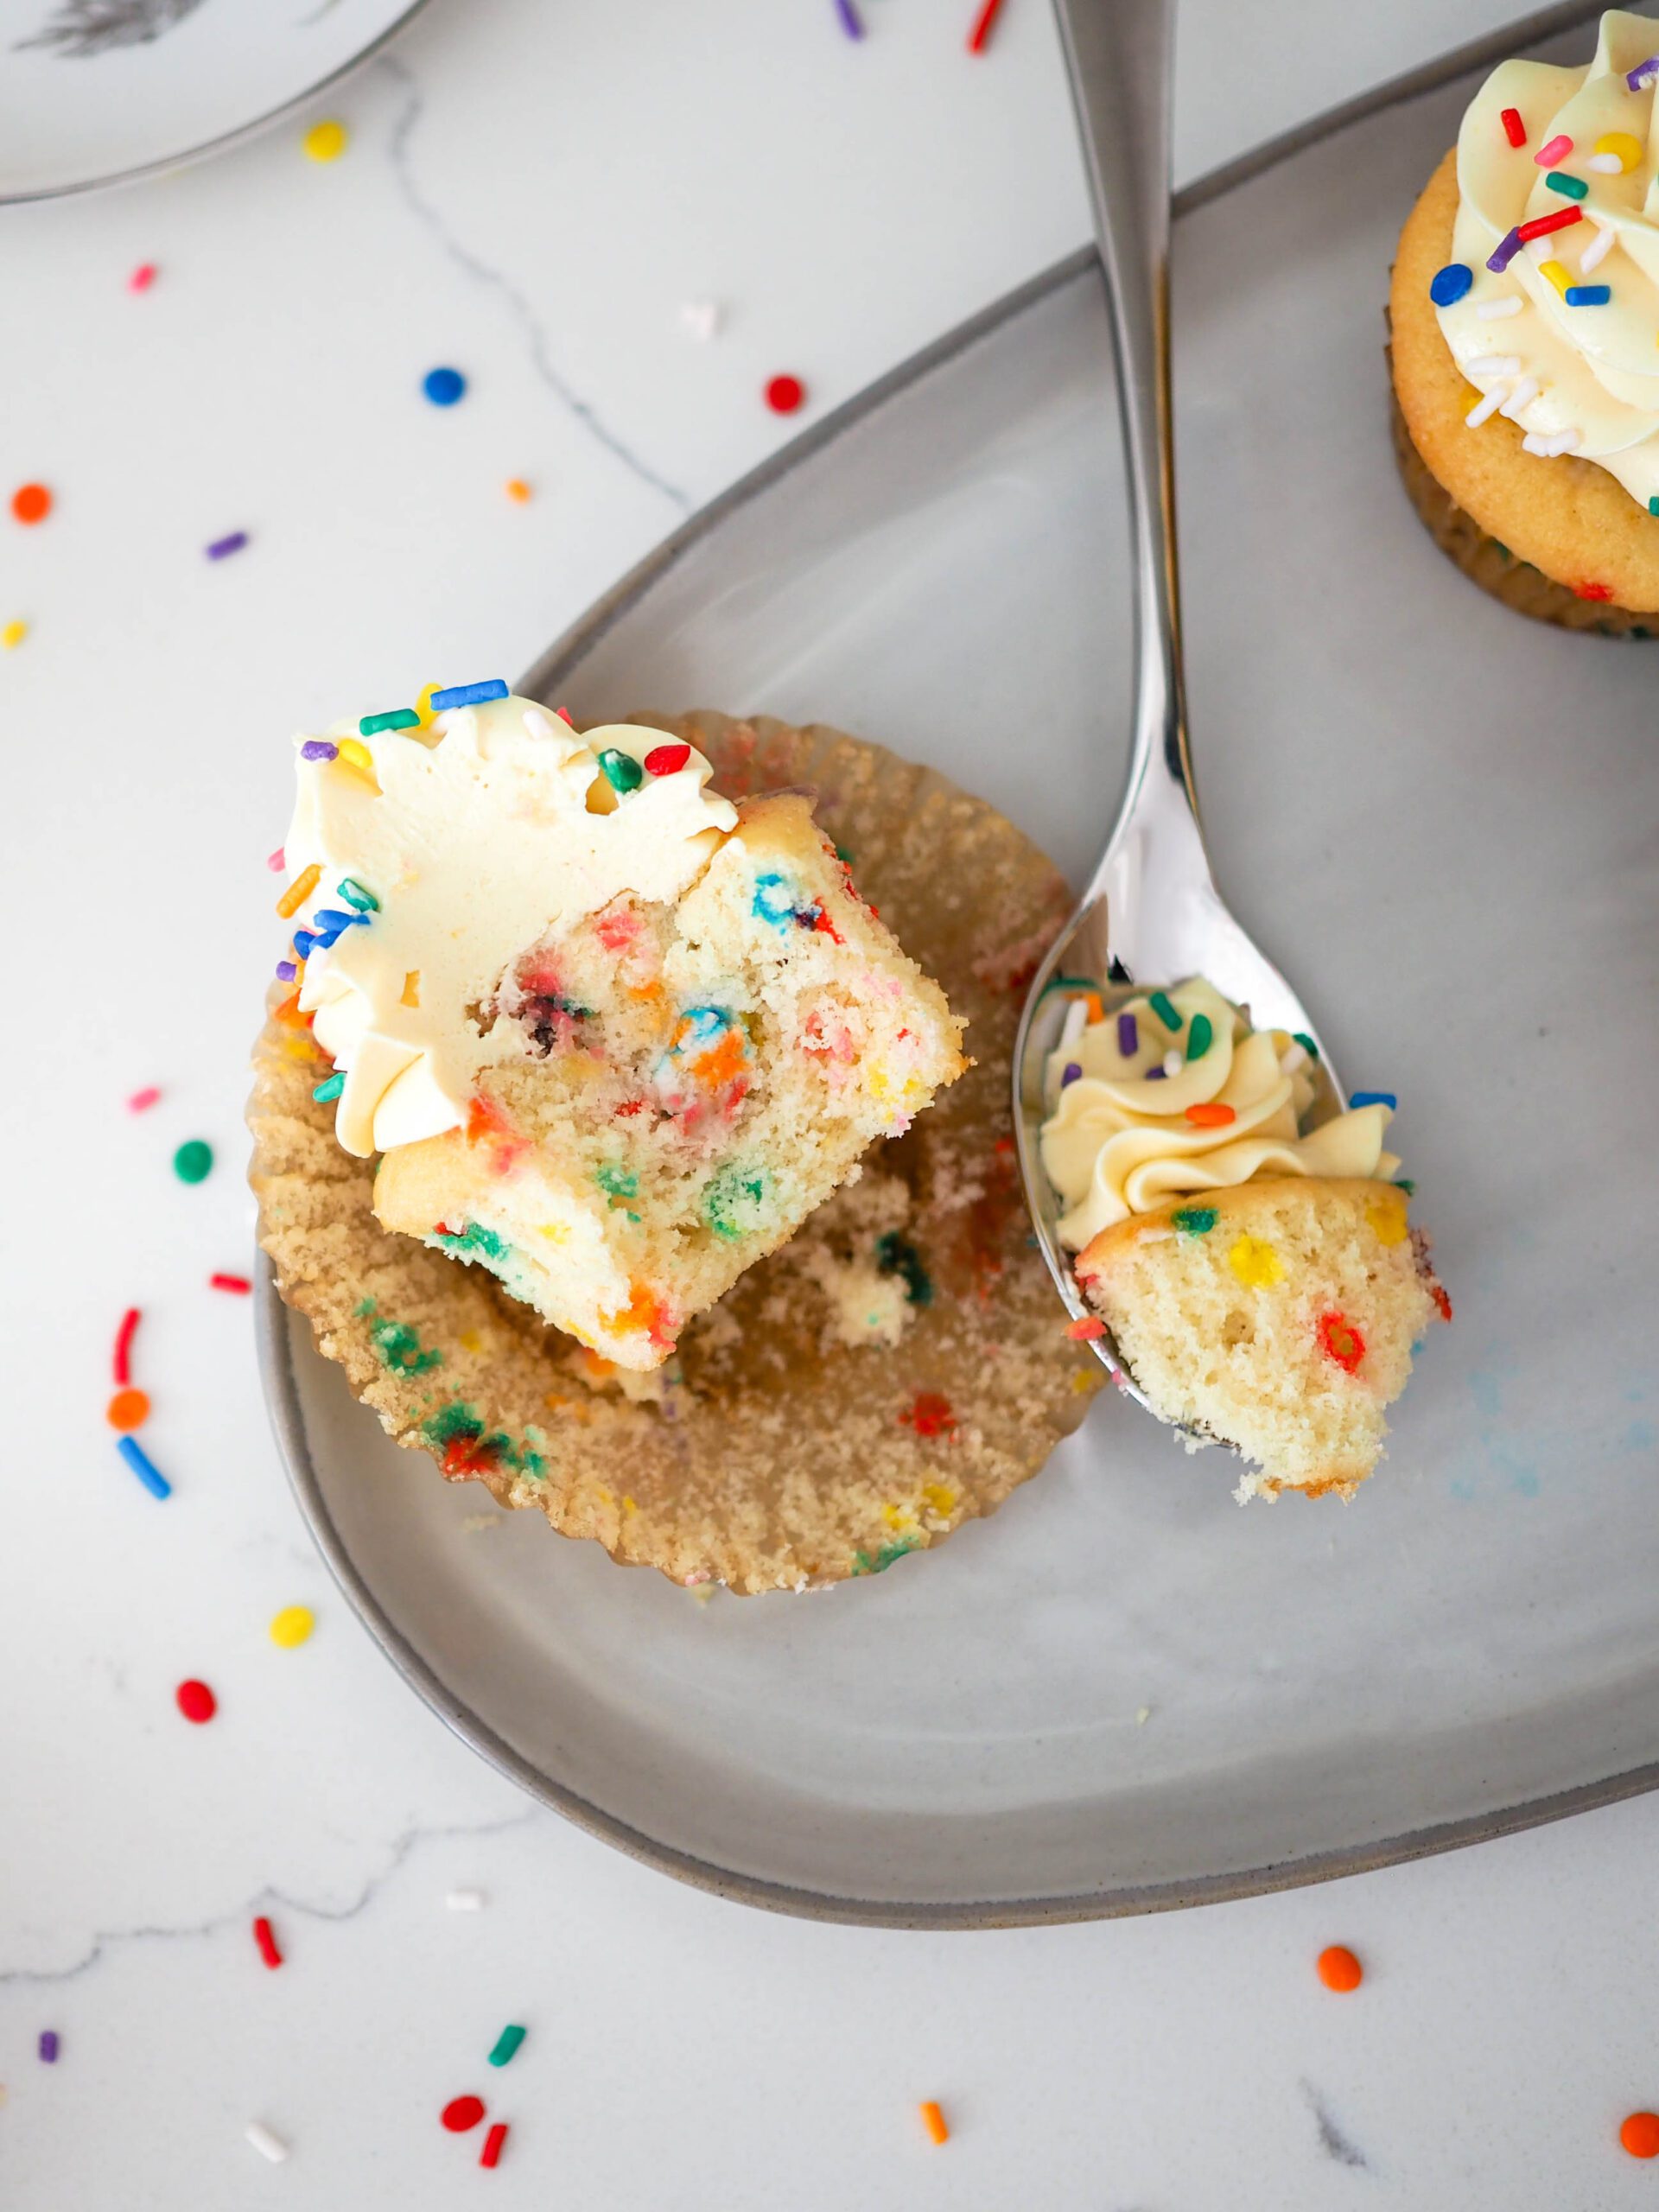 A spoon has removed a bite of confetti cupcake, with the spoon remaining nearby it on a plate.